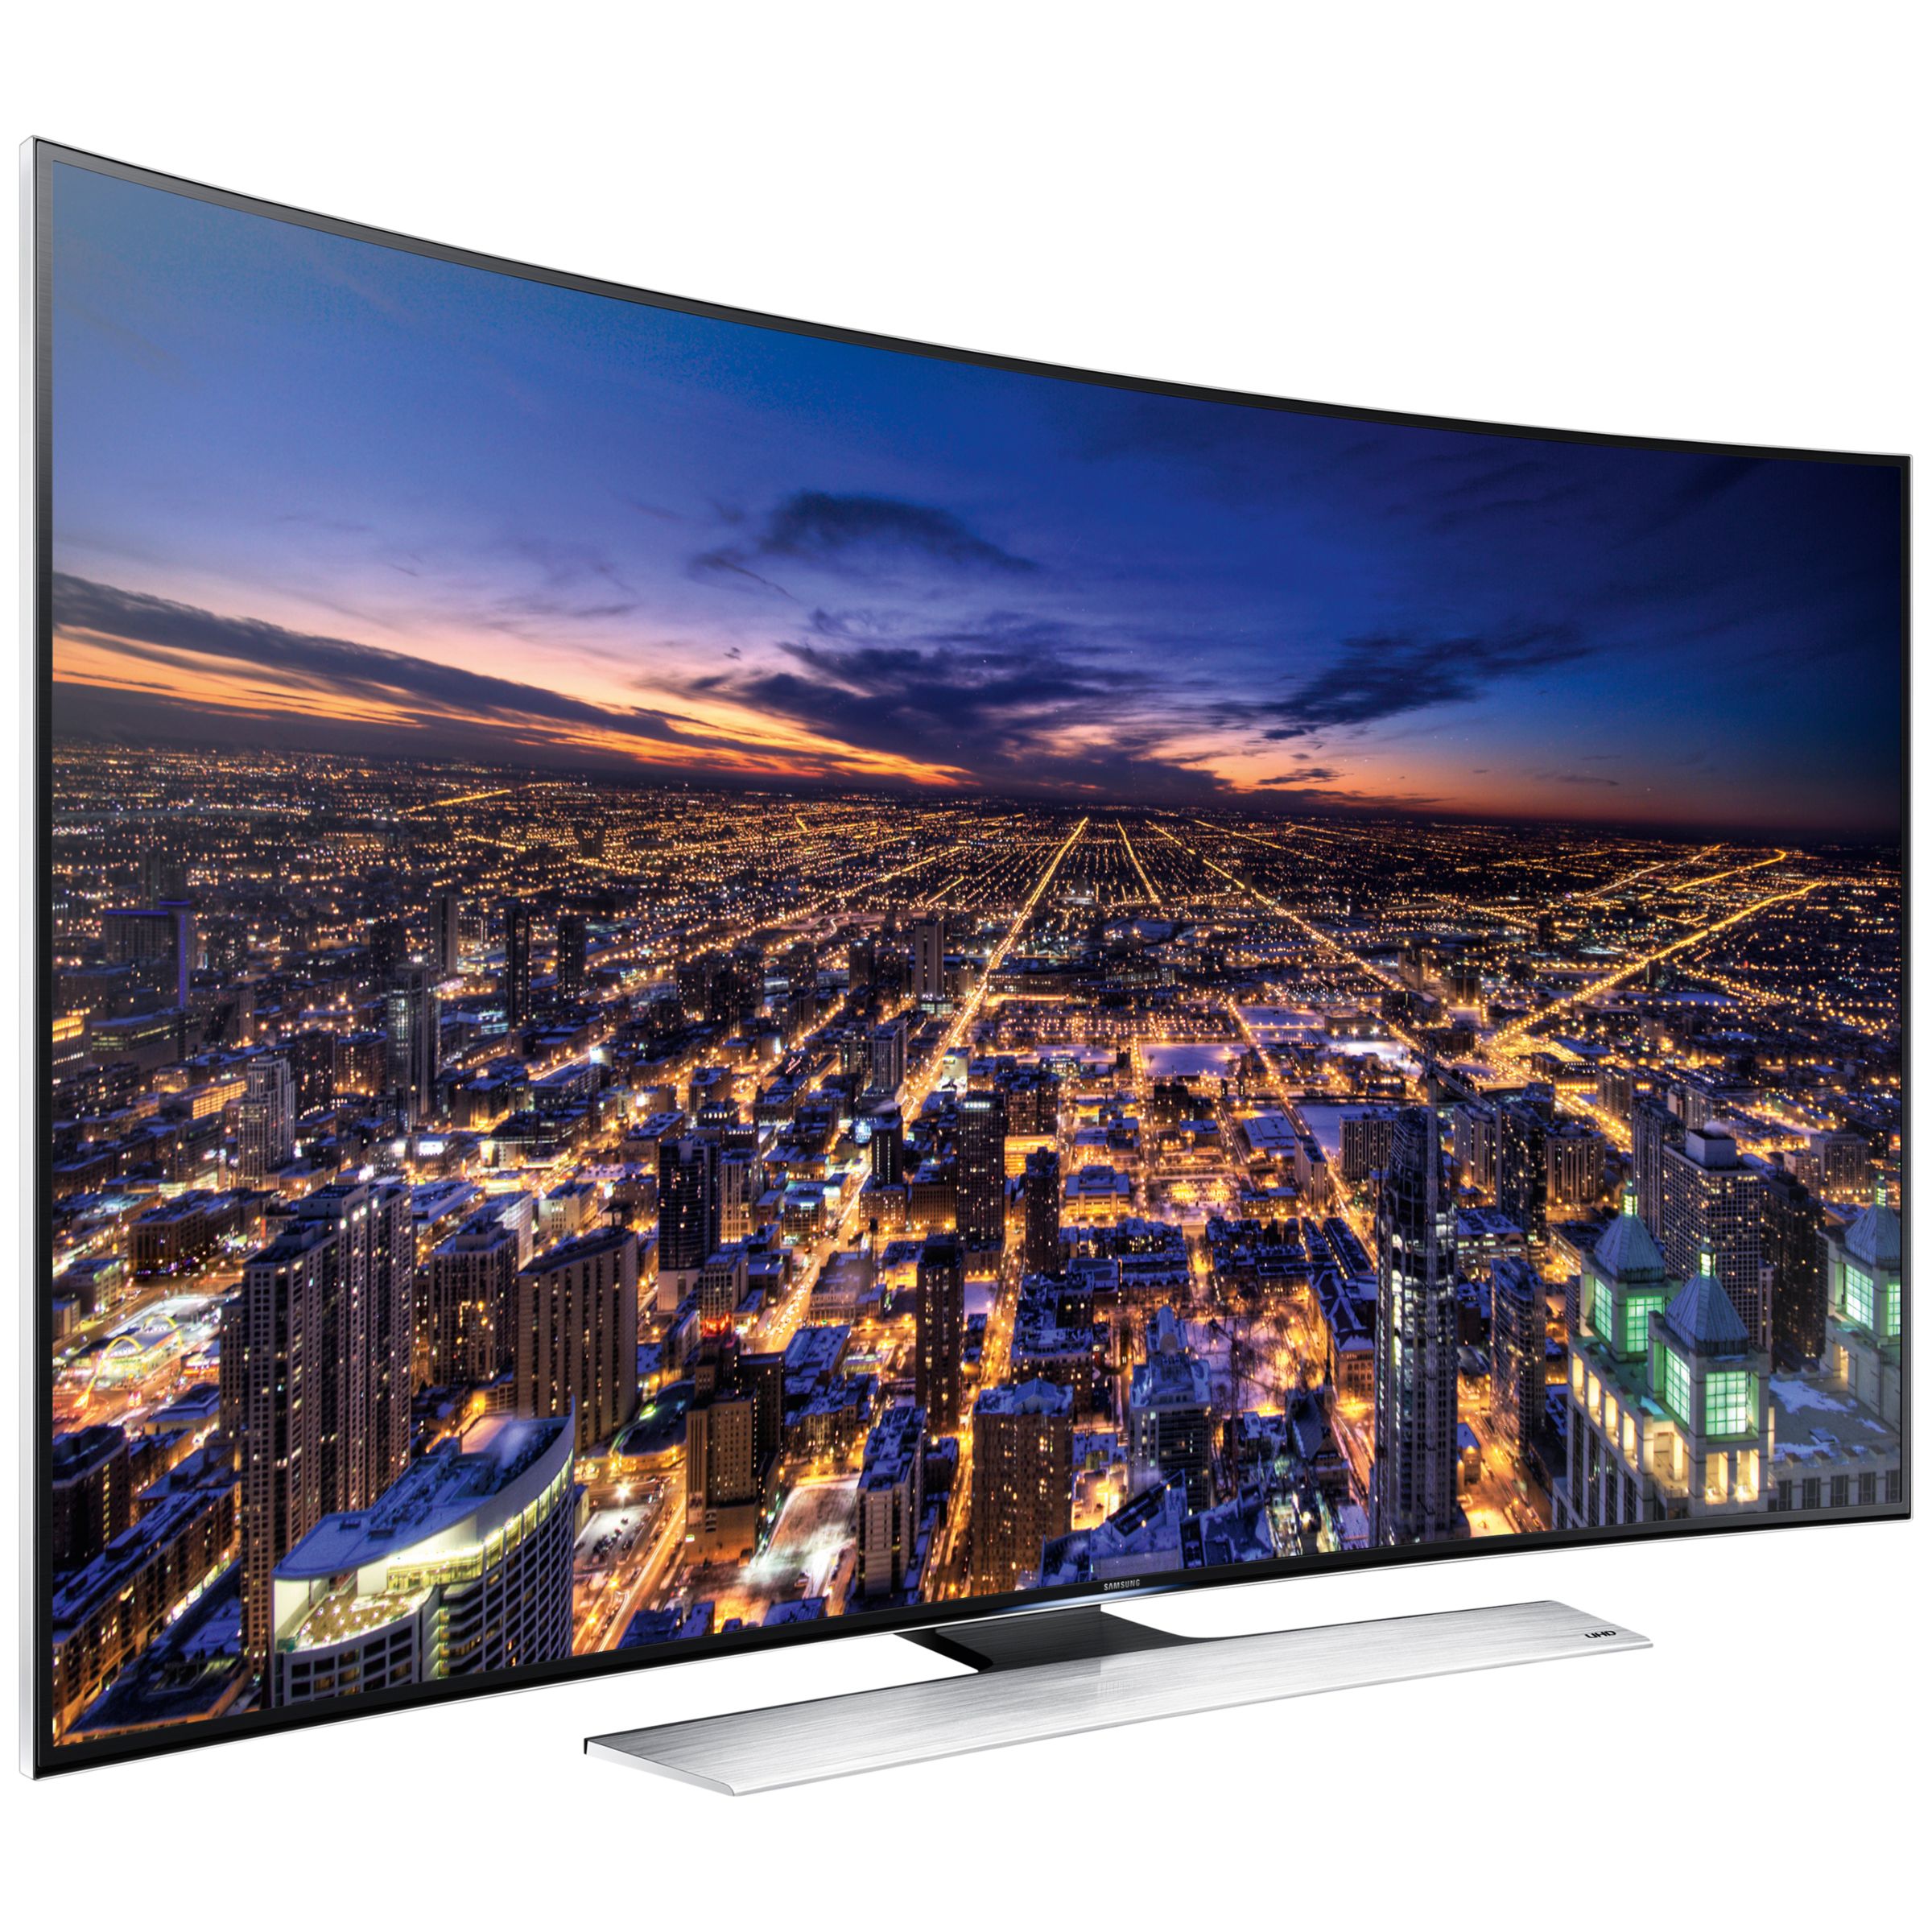 Samsung UE55HU8500 Curved 4K Ultra HD 3D Smart TV, 55" with Freeview/Freesat HD and 2x 3D Glasses